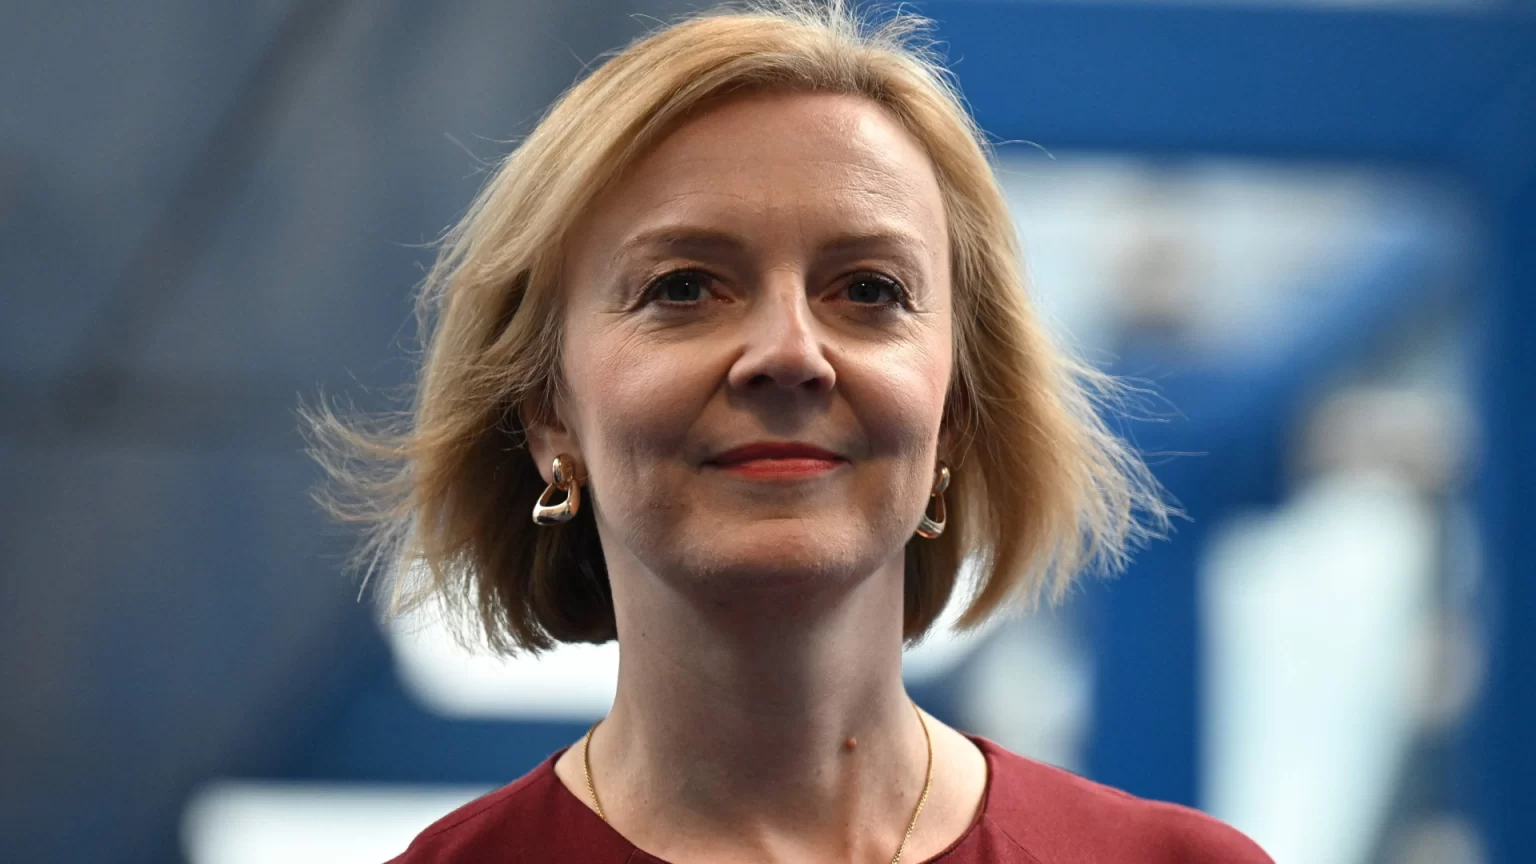 Tories put Liz Truss at the helm and she has set her course – now they must calm down and get behind her